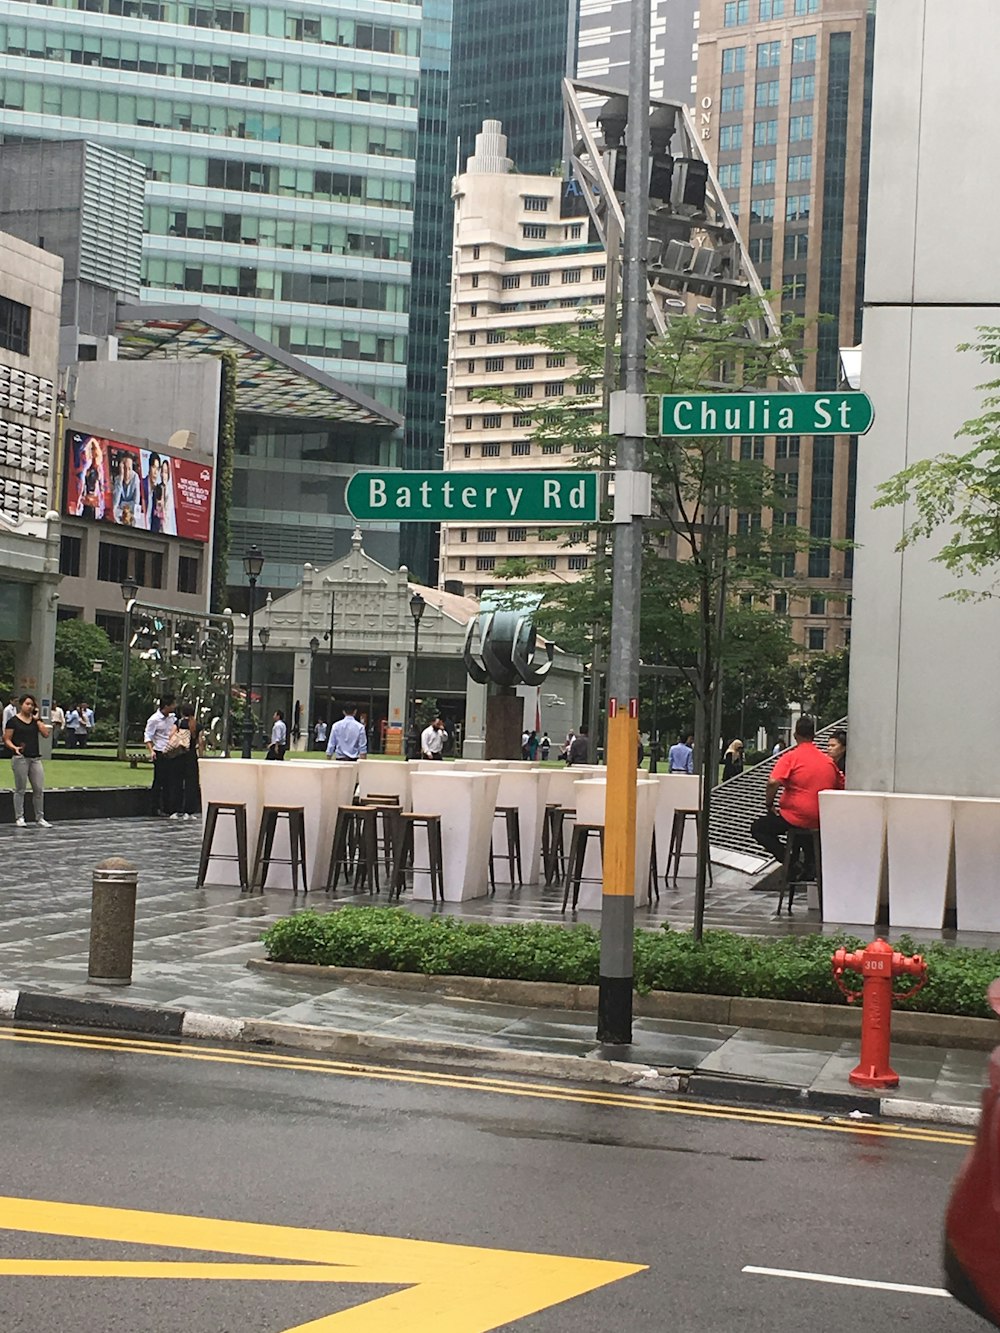 Battery road and Chulia street signage at the road